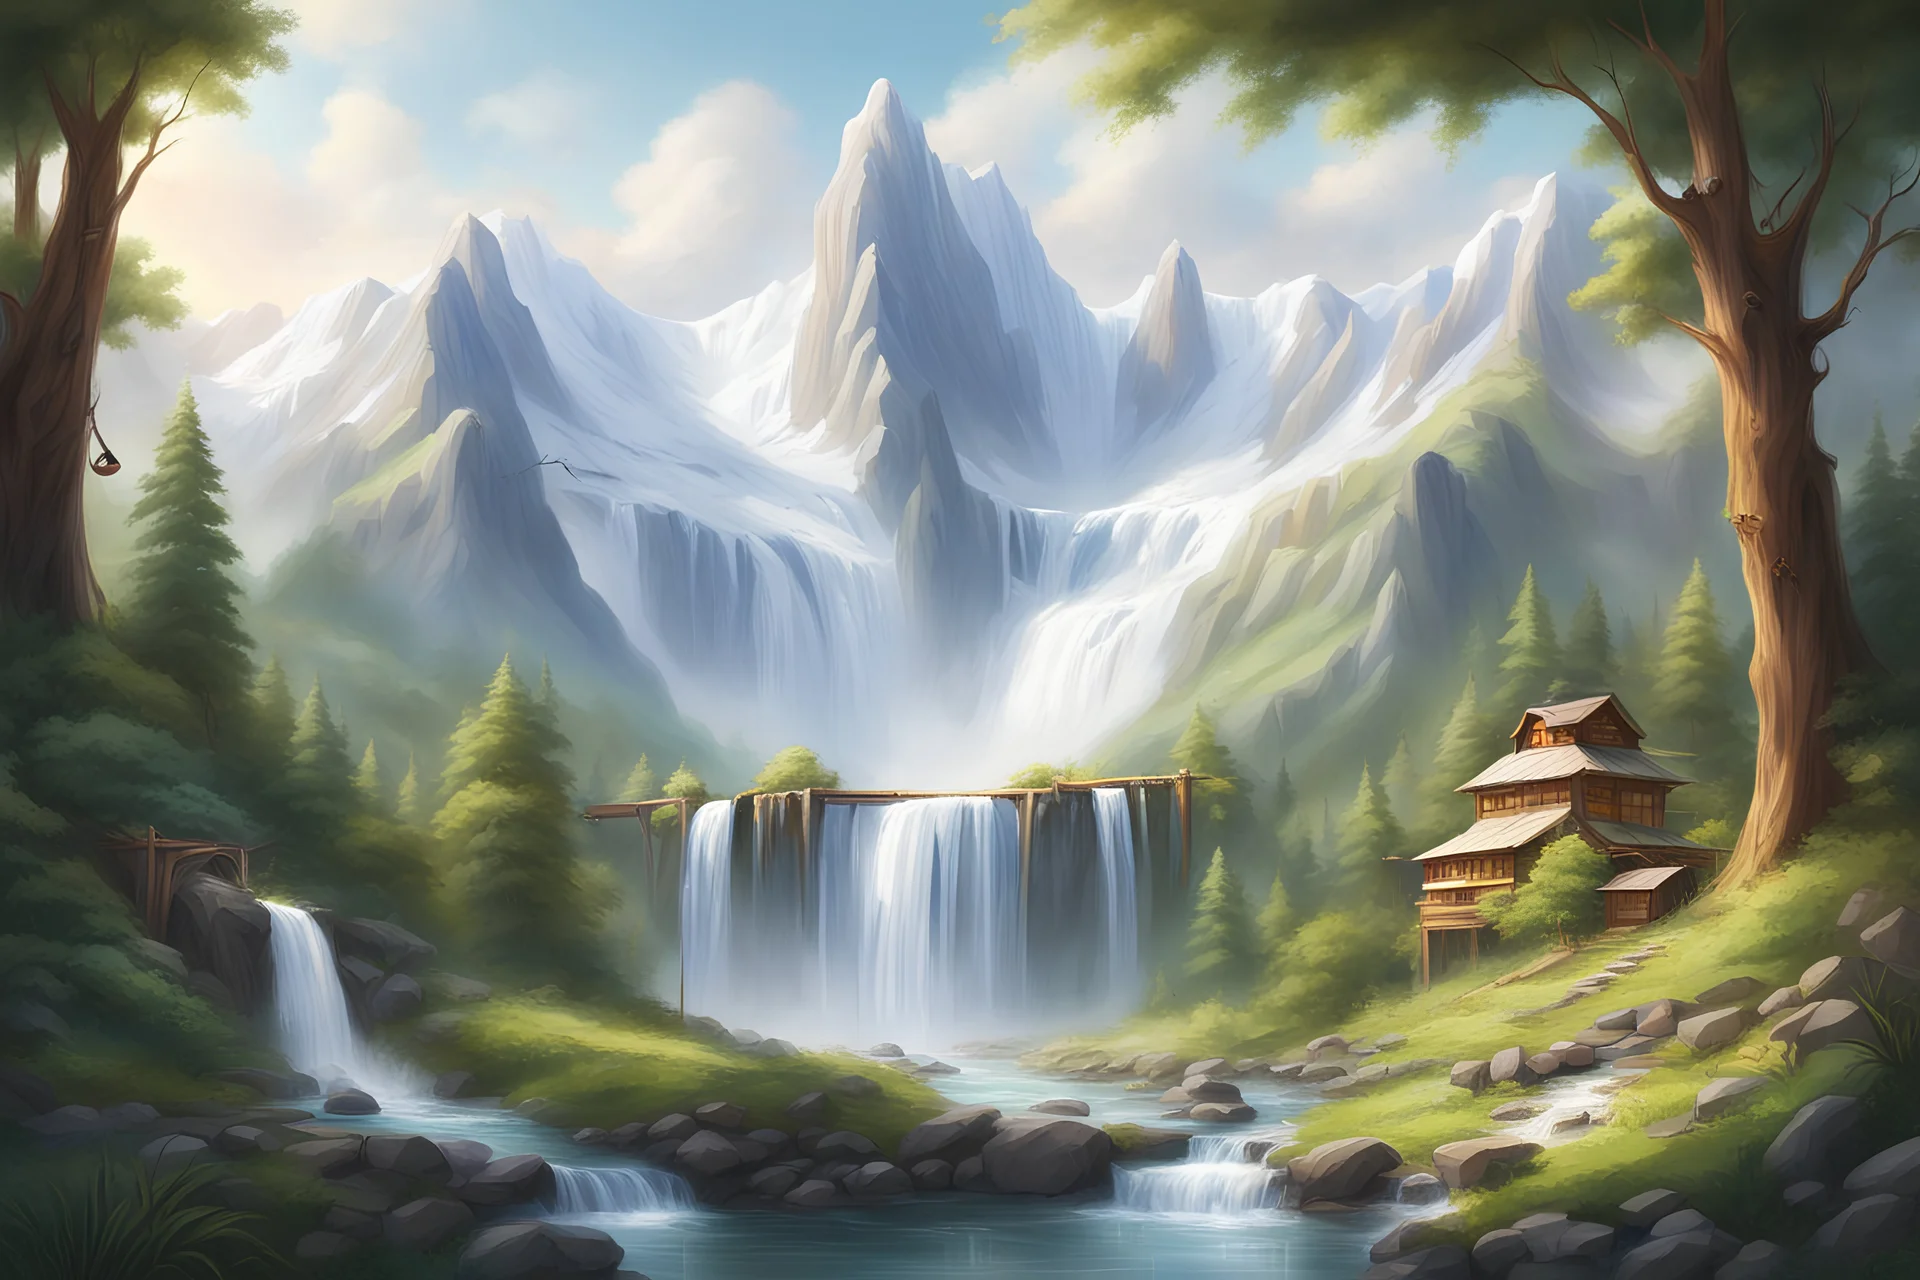 Illustrate a breathtaking landscape featuring towering snow-capped mountains, lush green valleys, and cascading waterfalls.